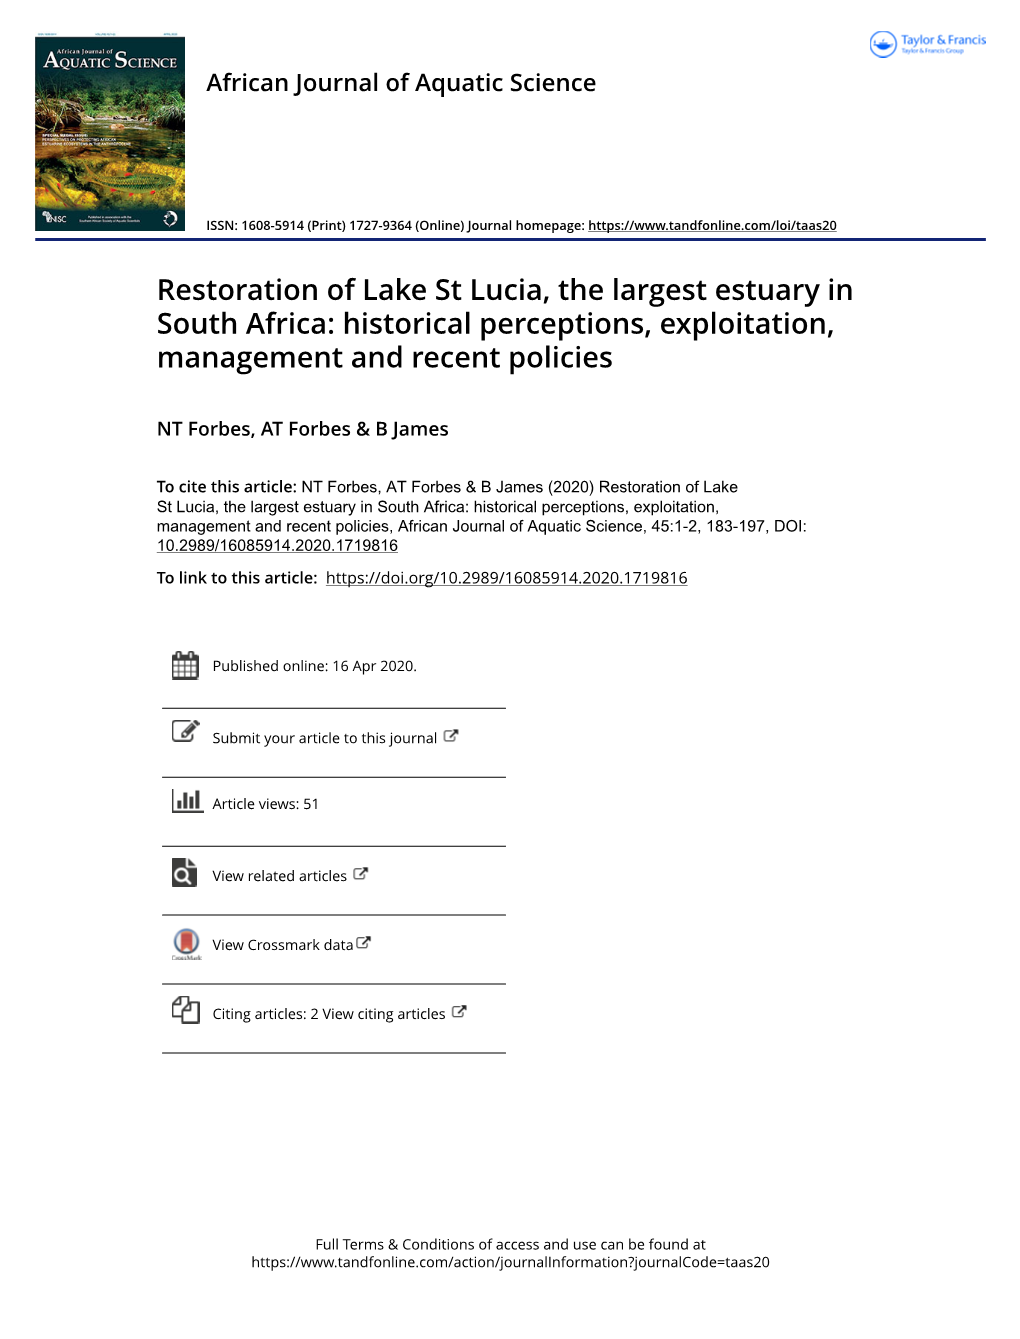 Restoration of Lake St Lucia, the Largest Estuary in South Africa: Historical Perceptions, Exploitation, Management and Recent Policies